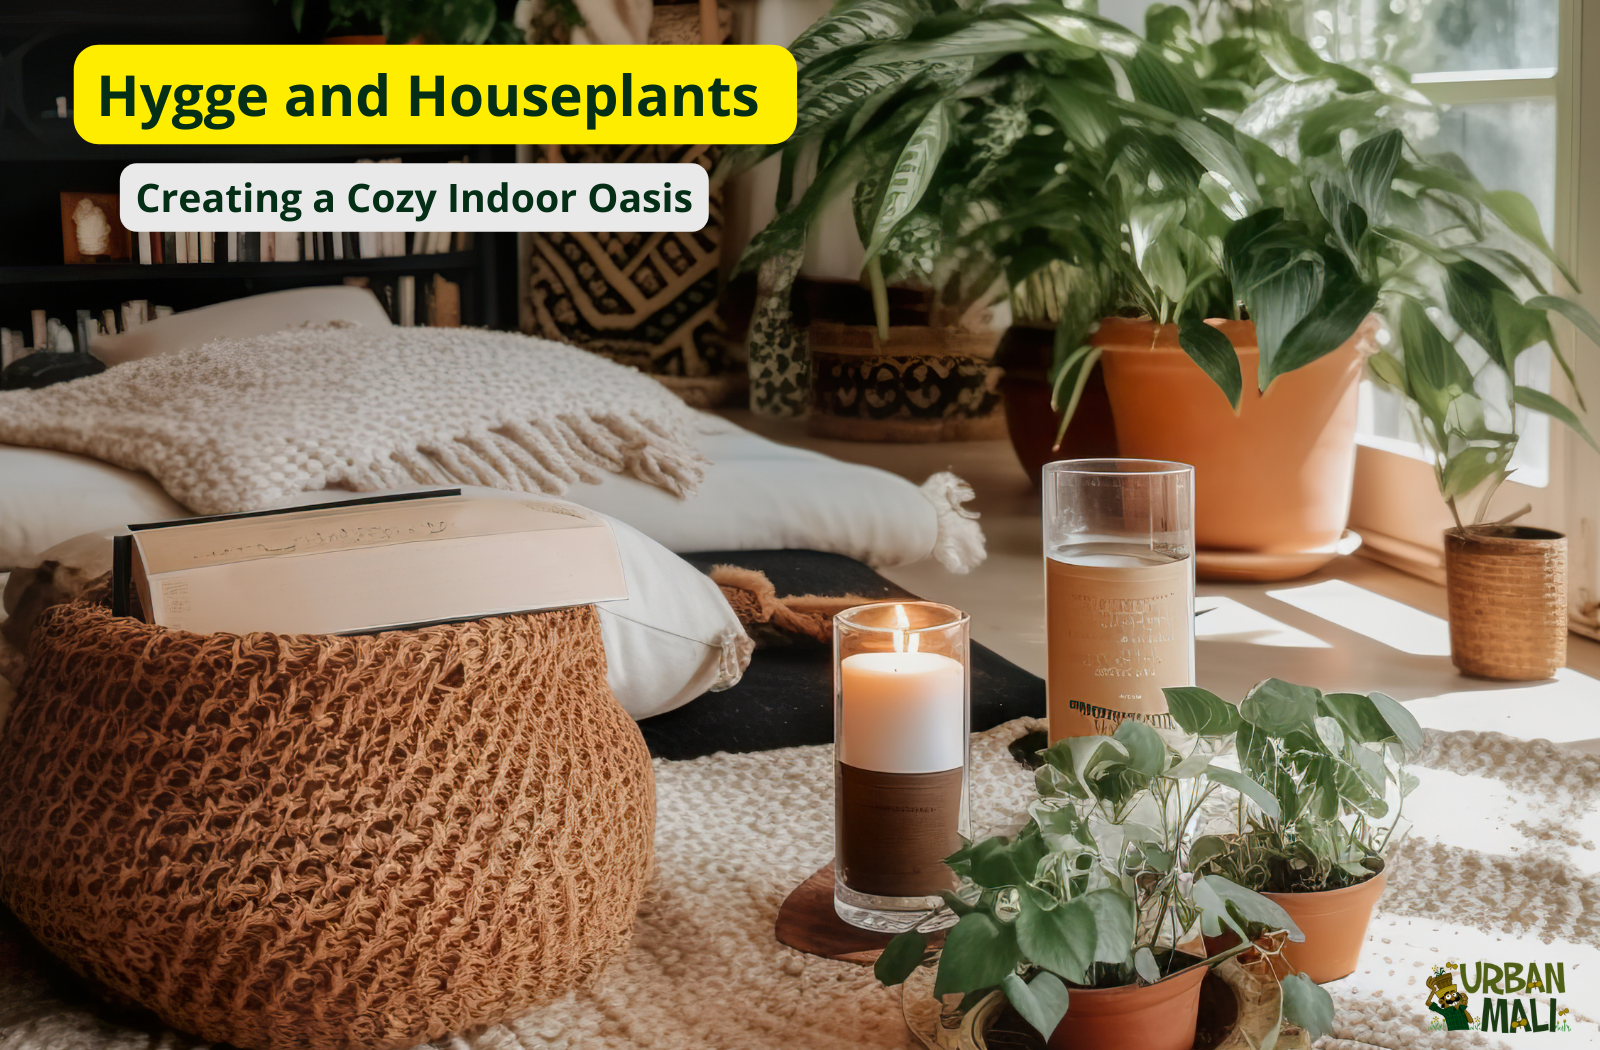 Hygge and Houseplants: Creating a Cozy Indoor Oasis